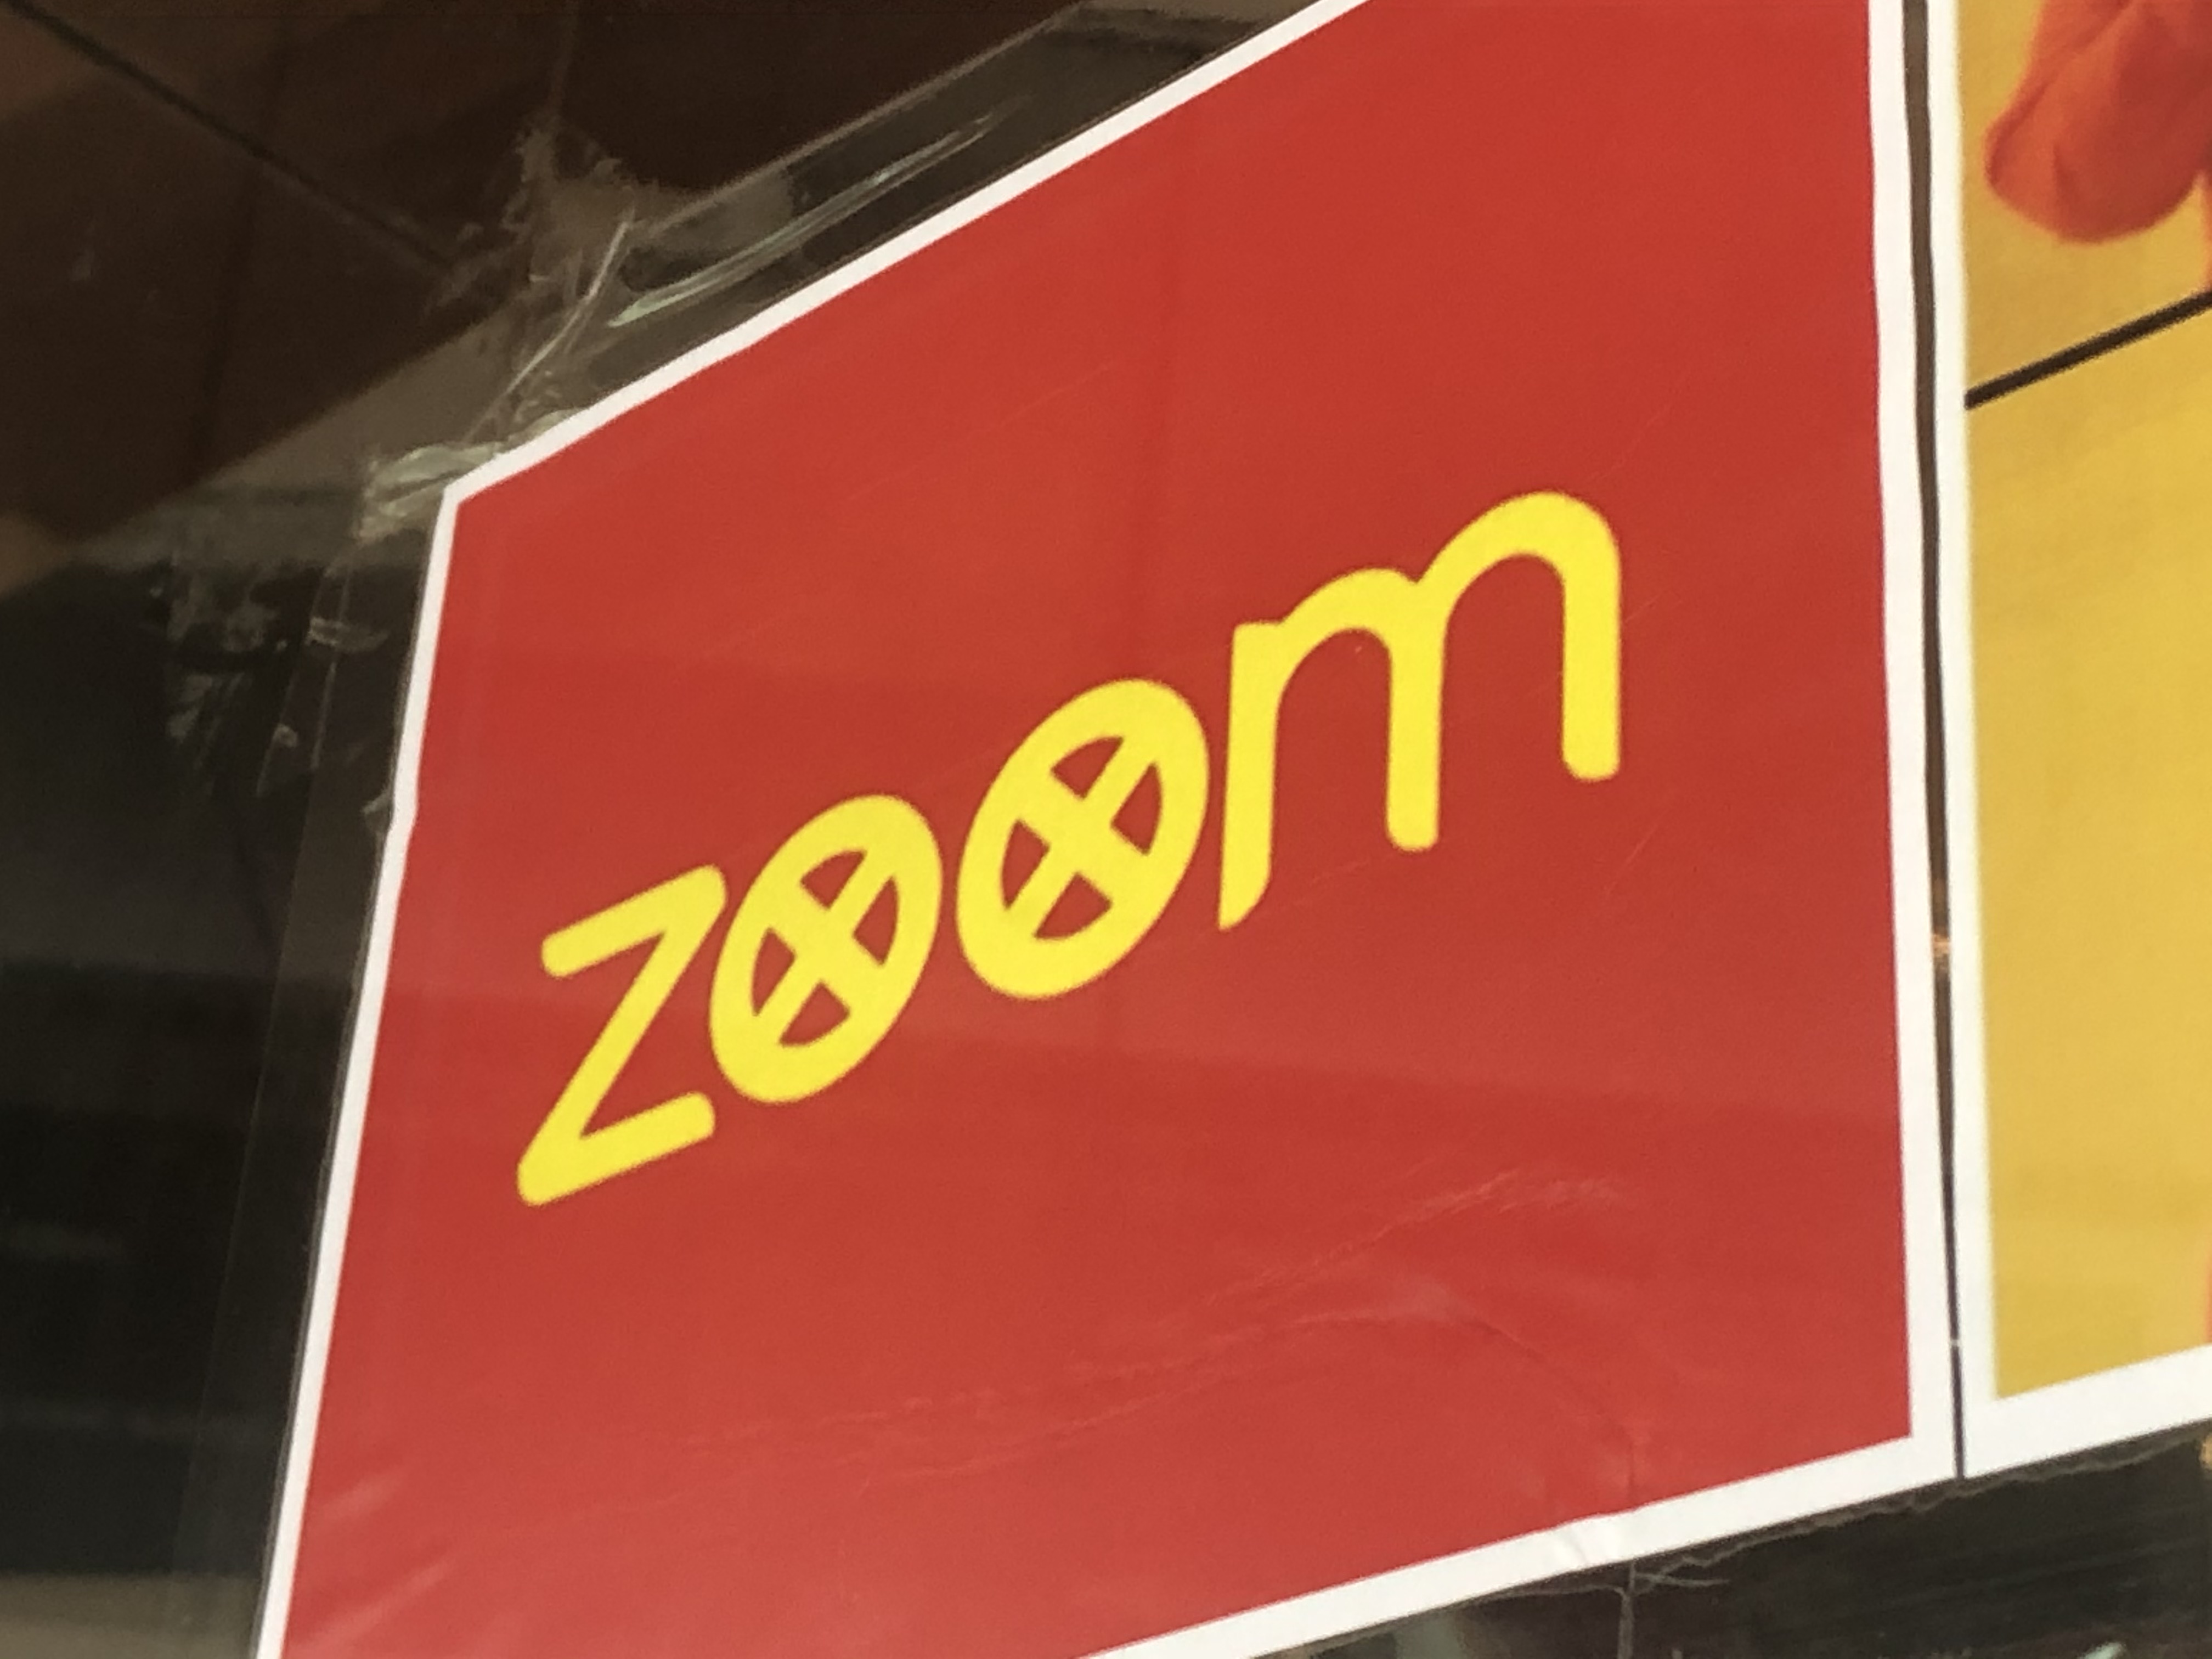  Fig. 3. Personal photograph of an anti-Zoom poster with Xs in each letter “o” in the word “Zoom” appended to a campus window. This photograph depicts a square red sign on a window. The sign is red with a white border and contains the word “zoom” in yellow font with the Os x-ed out.
